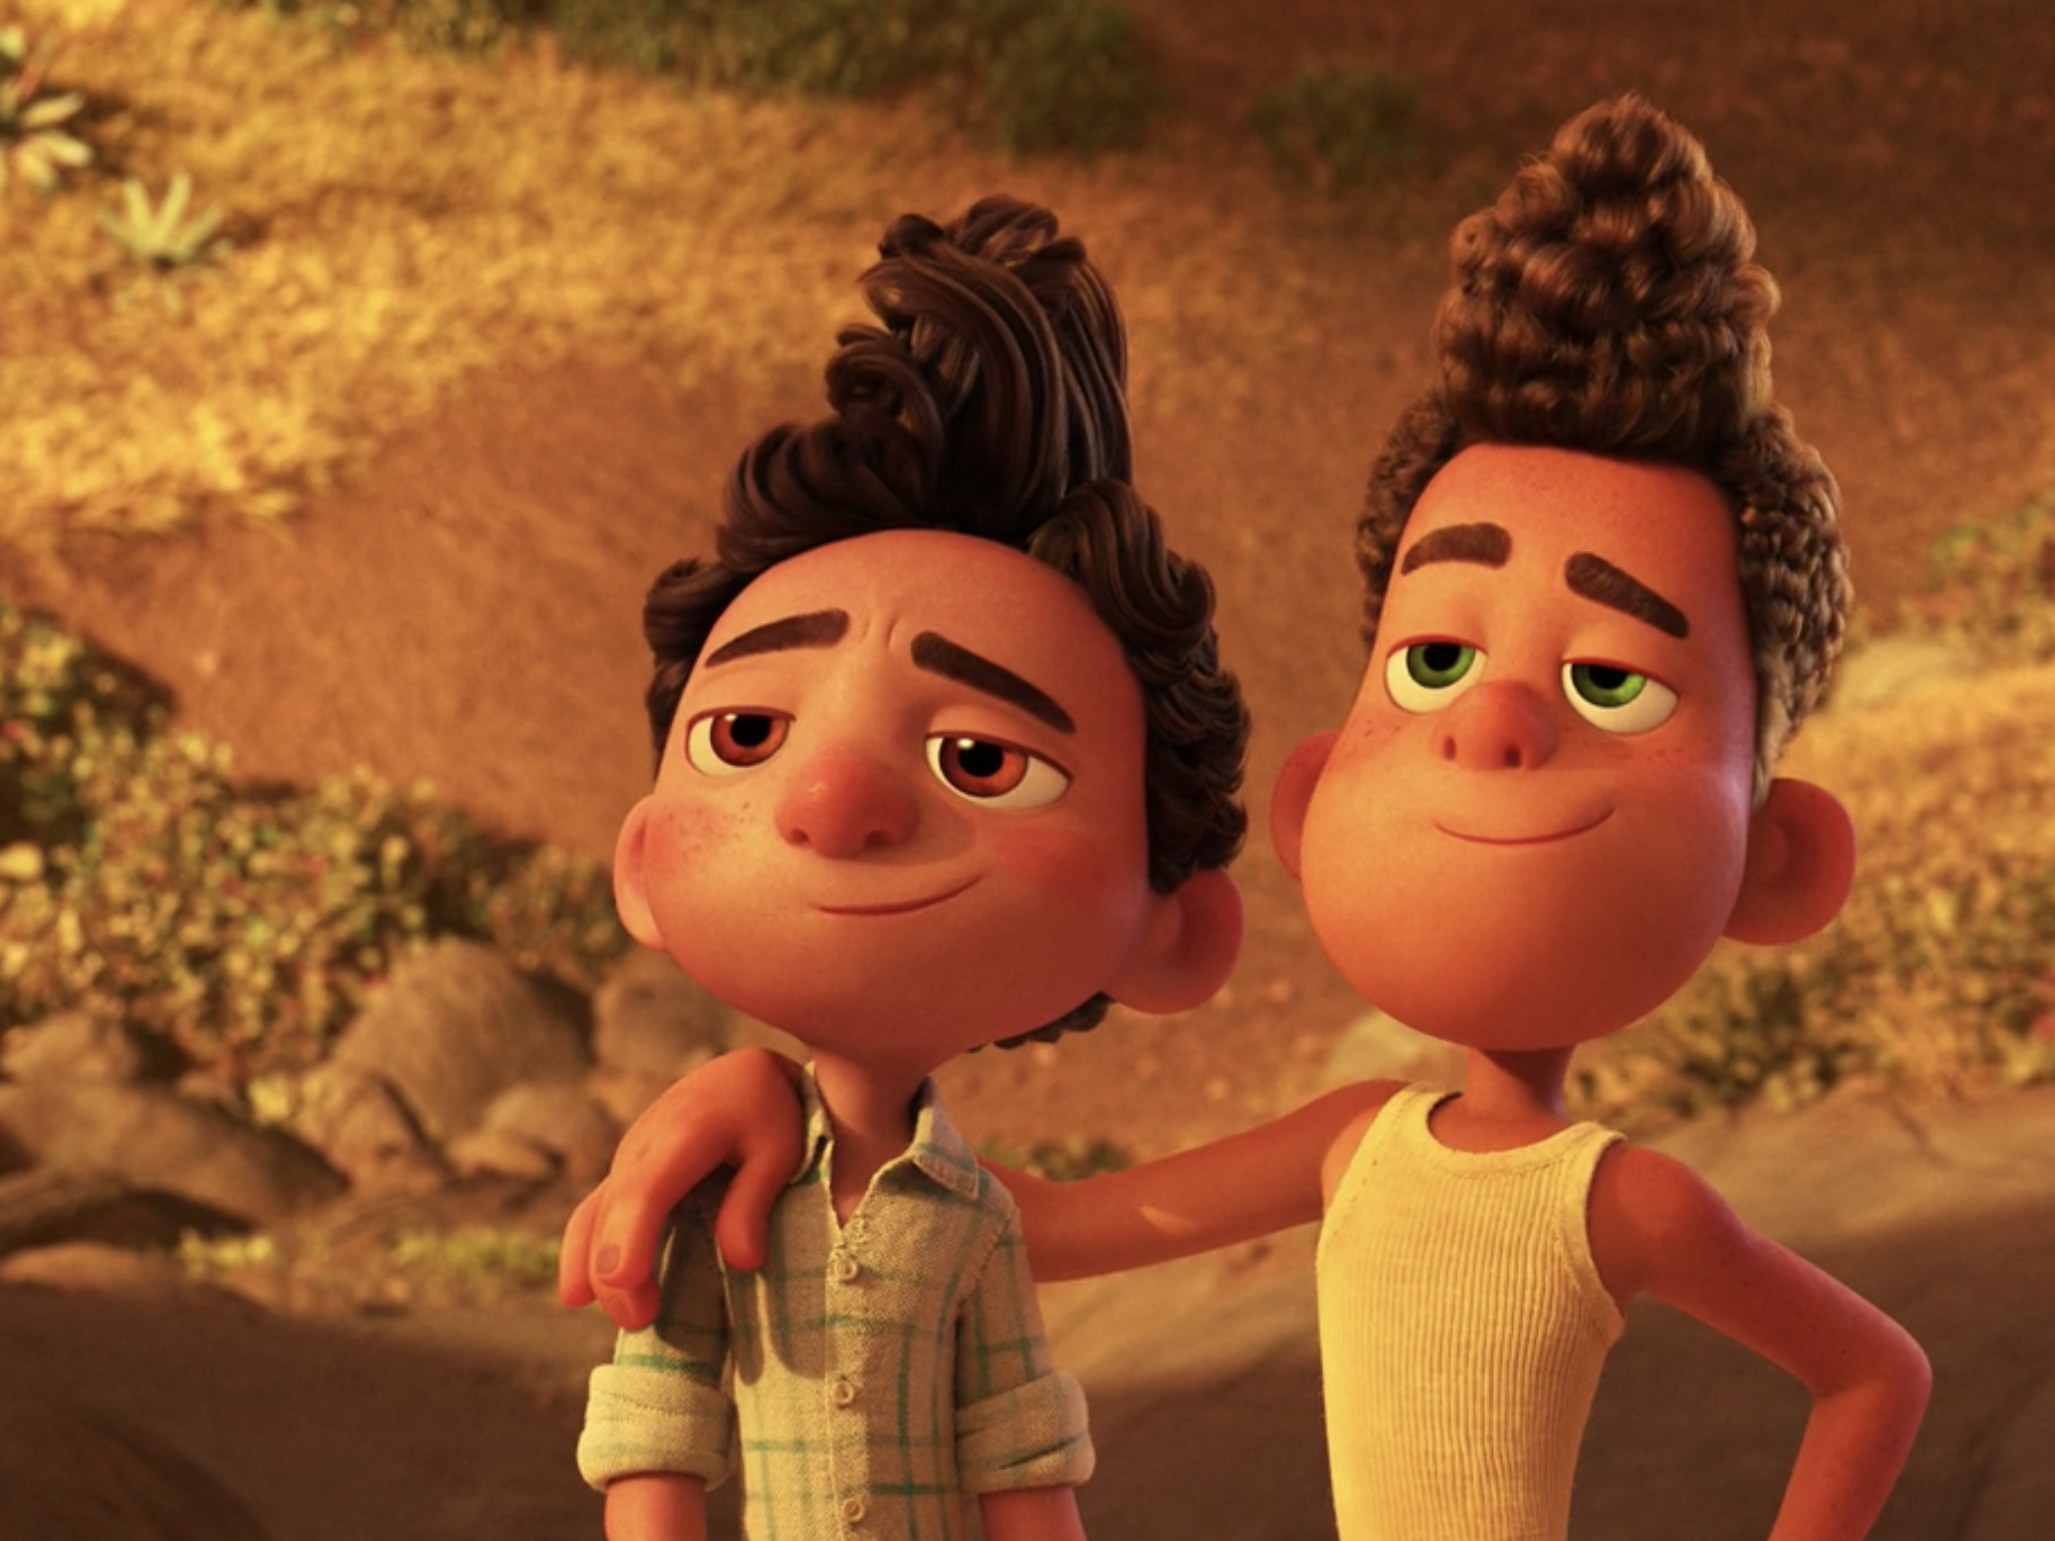 Luca' proves Disney's Pixar wasn't brave enough to fully commit to their  first queer animated film